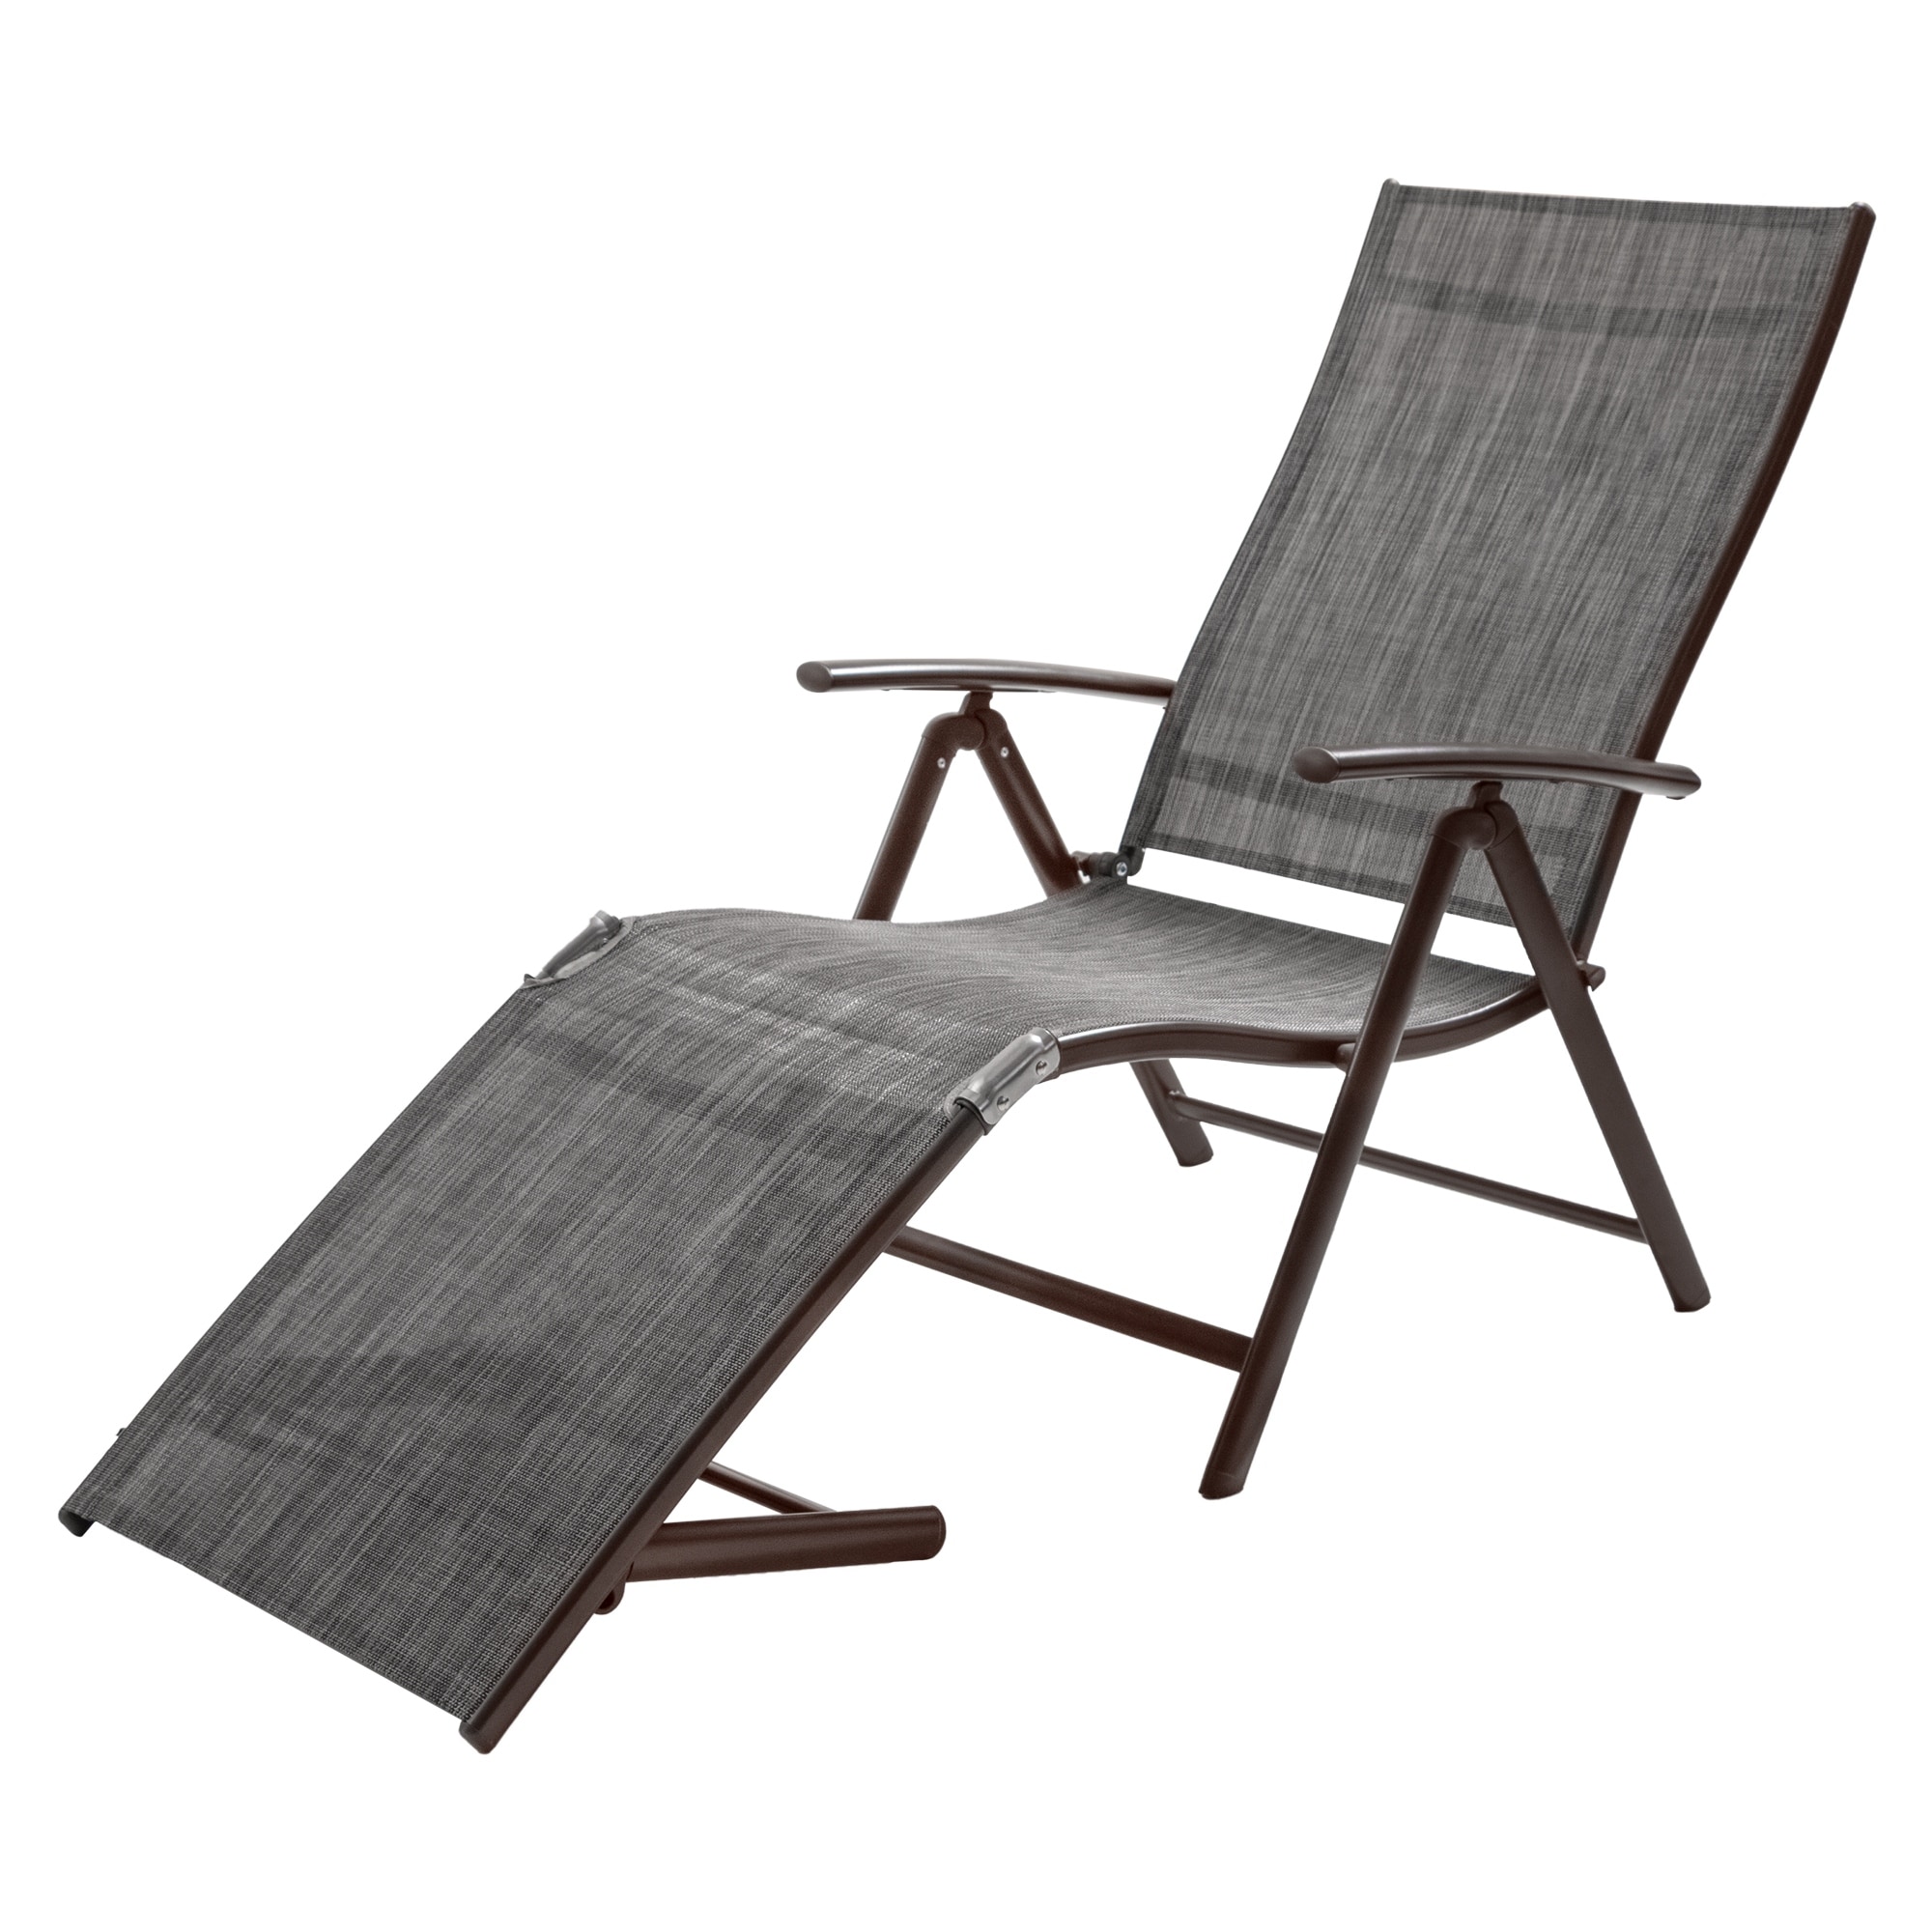 Outdoor Adjustable Aluminum Patio Folding Chaise Lounge Chair - 20w×45d×14h